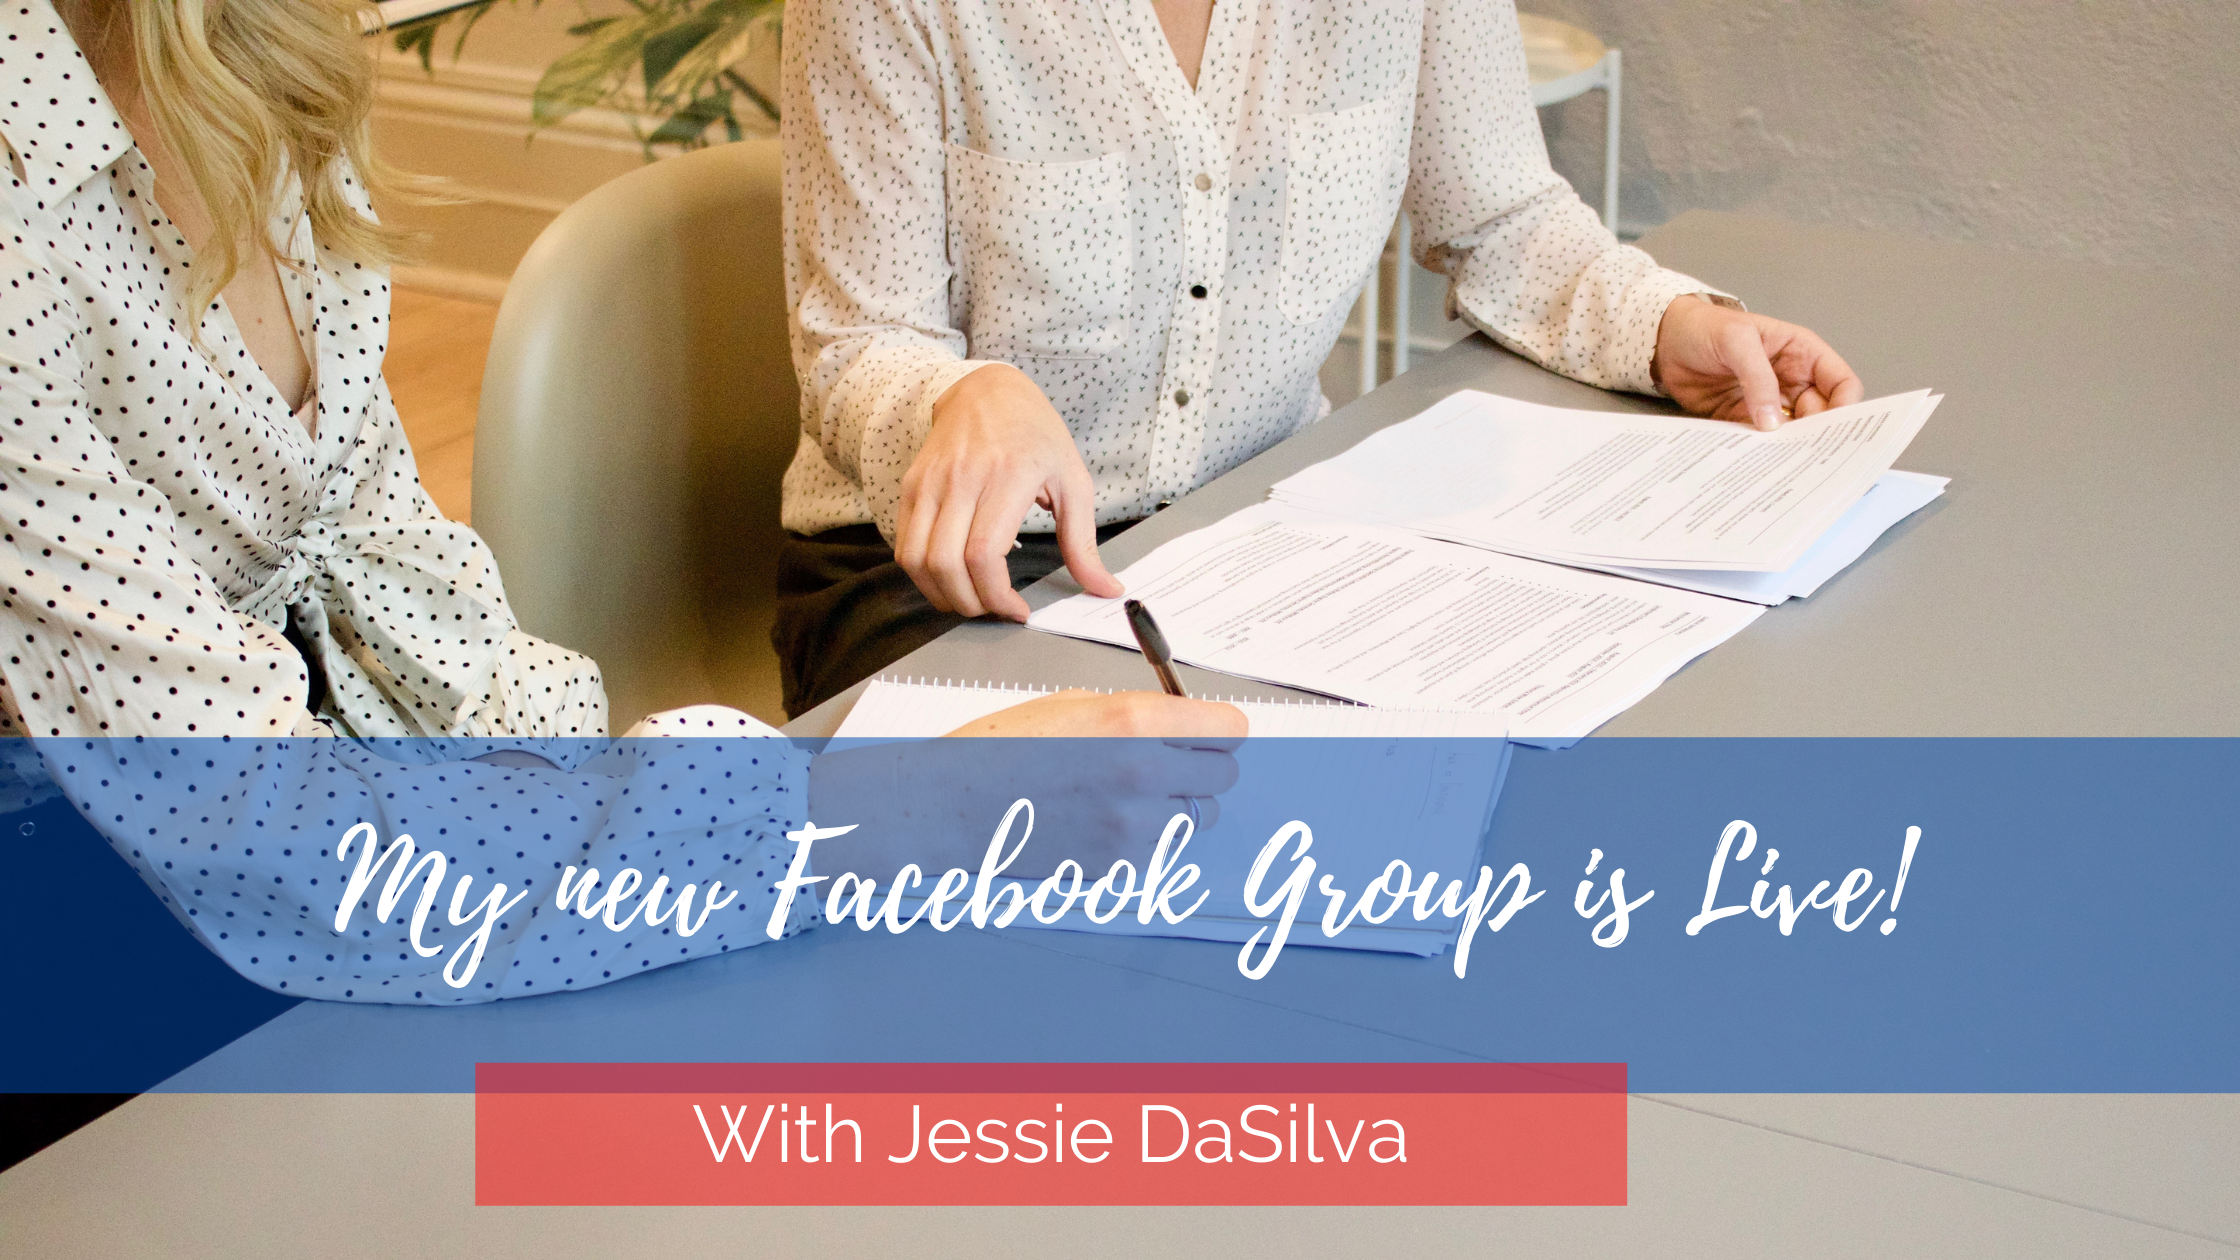 A picture of ladies working at a desk with the words "My new Facebook Group is now live!" on top with Jessie DaSilva